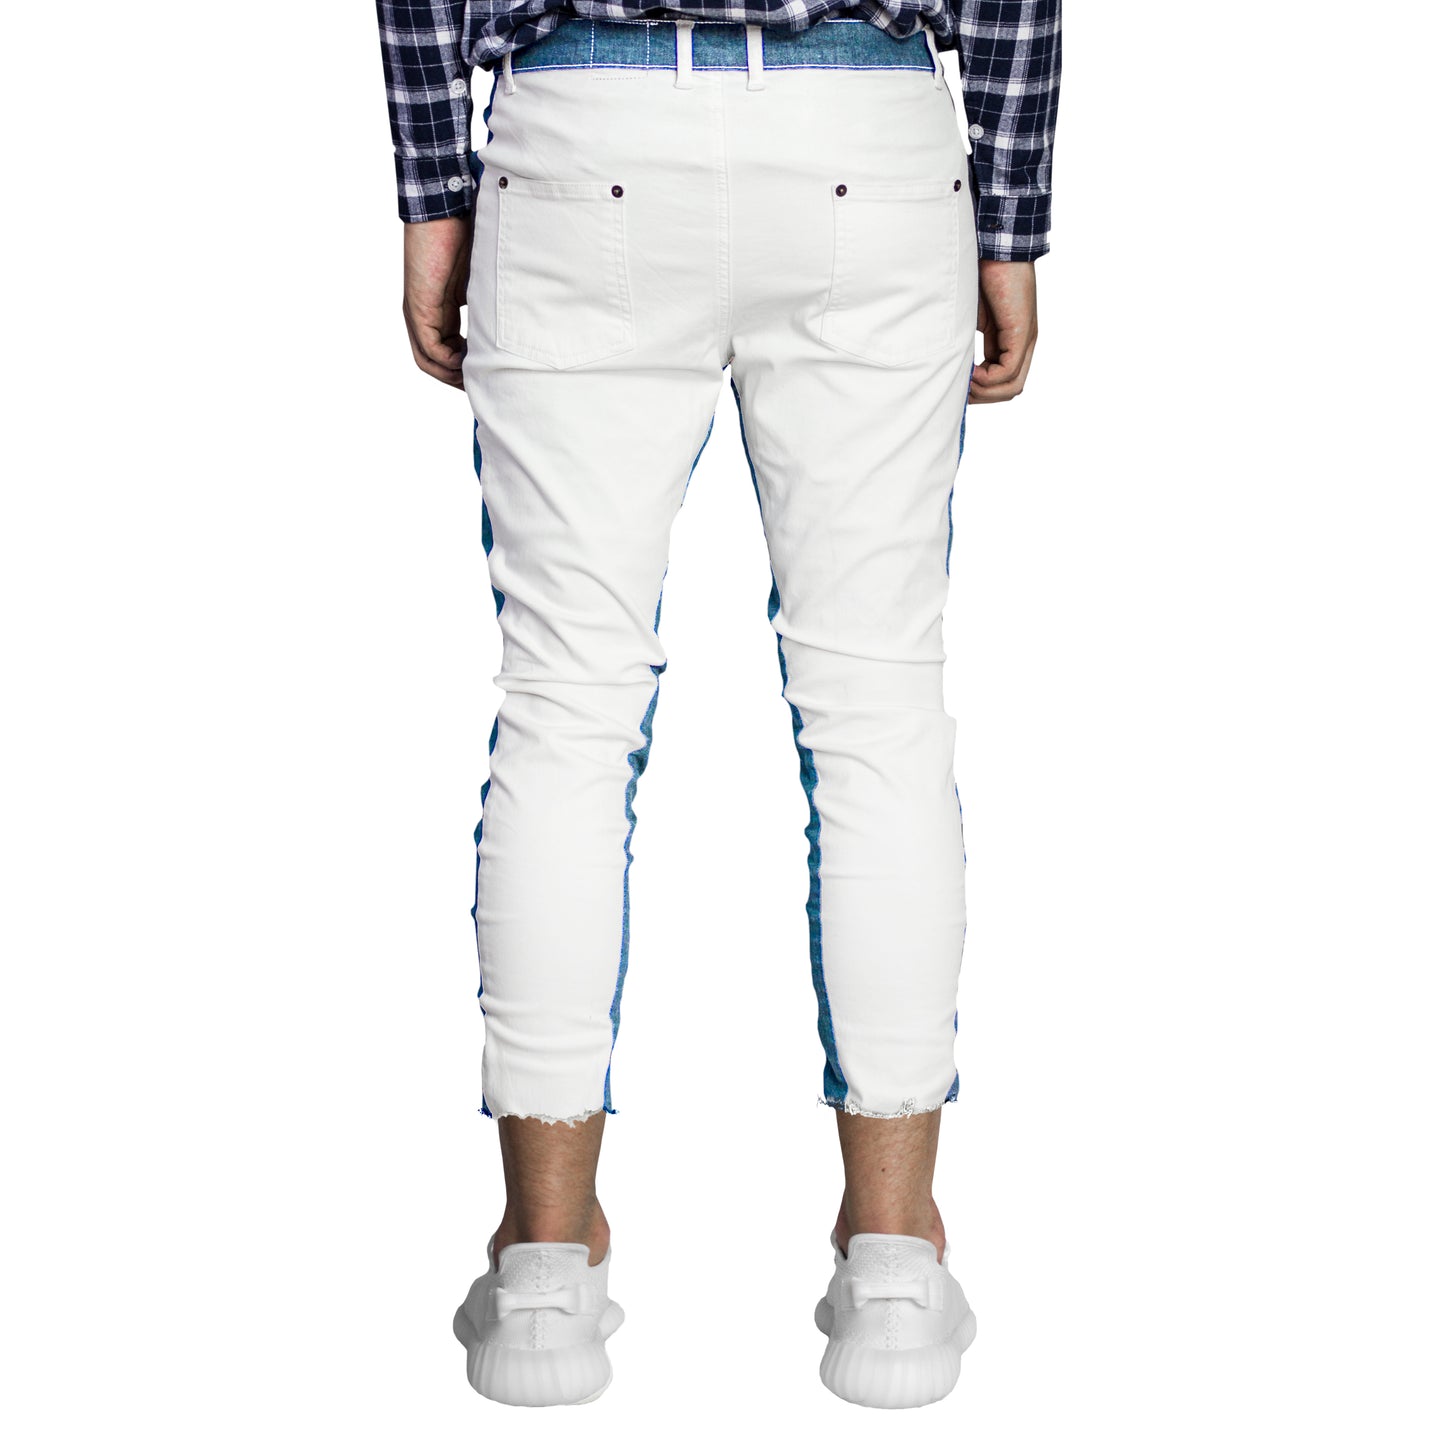 Cropped Track Jeans : White/Blue